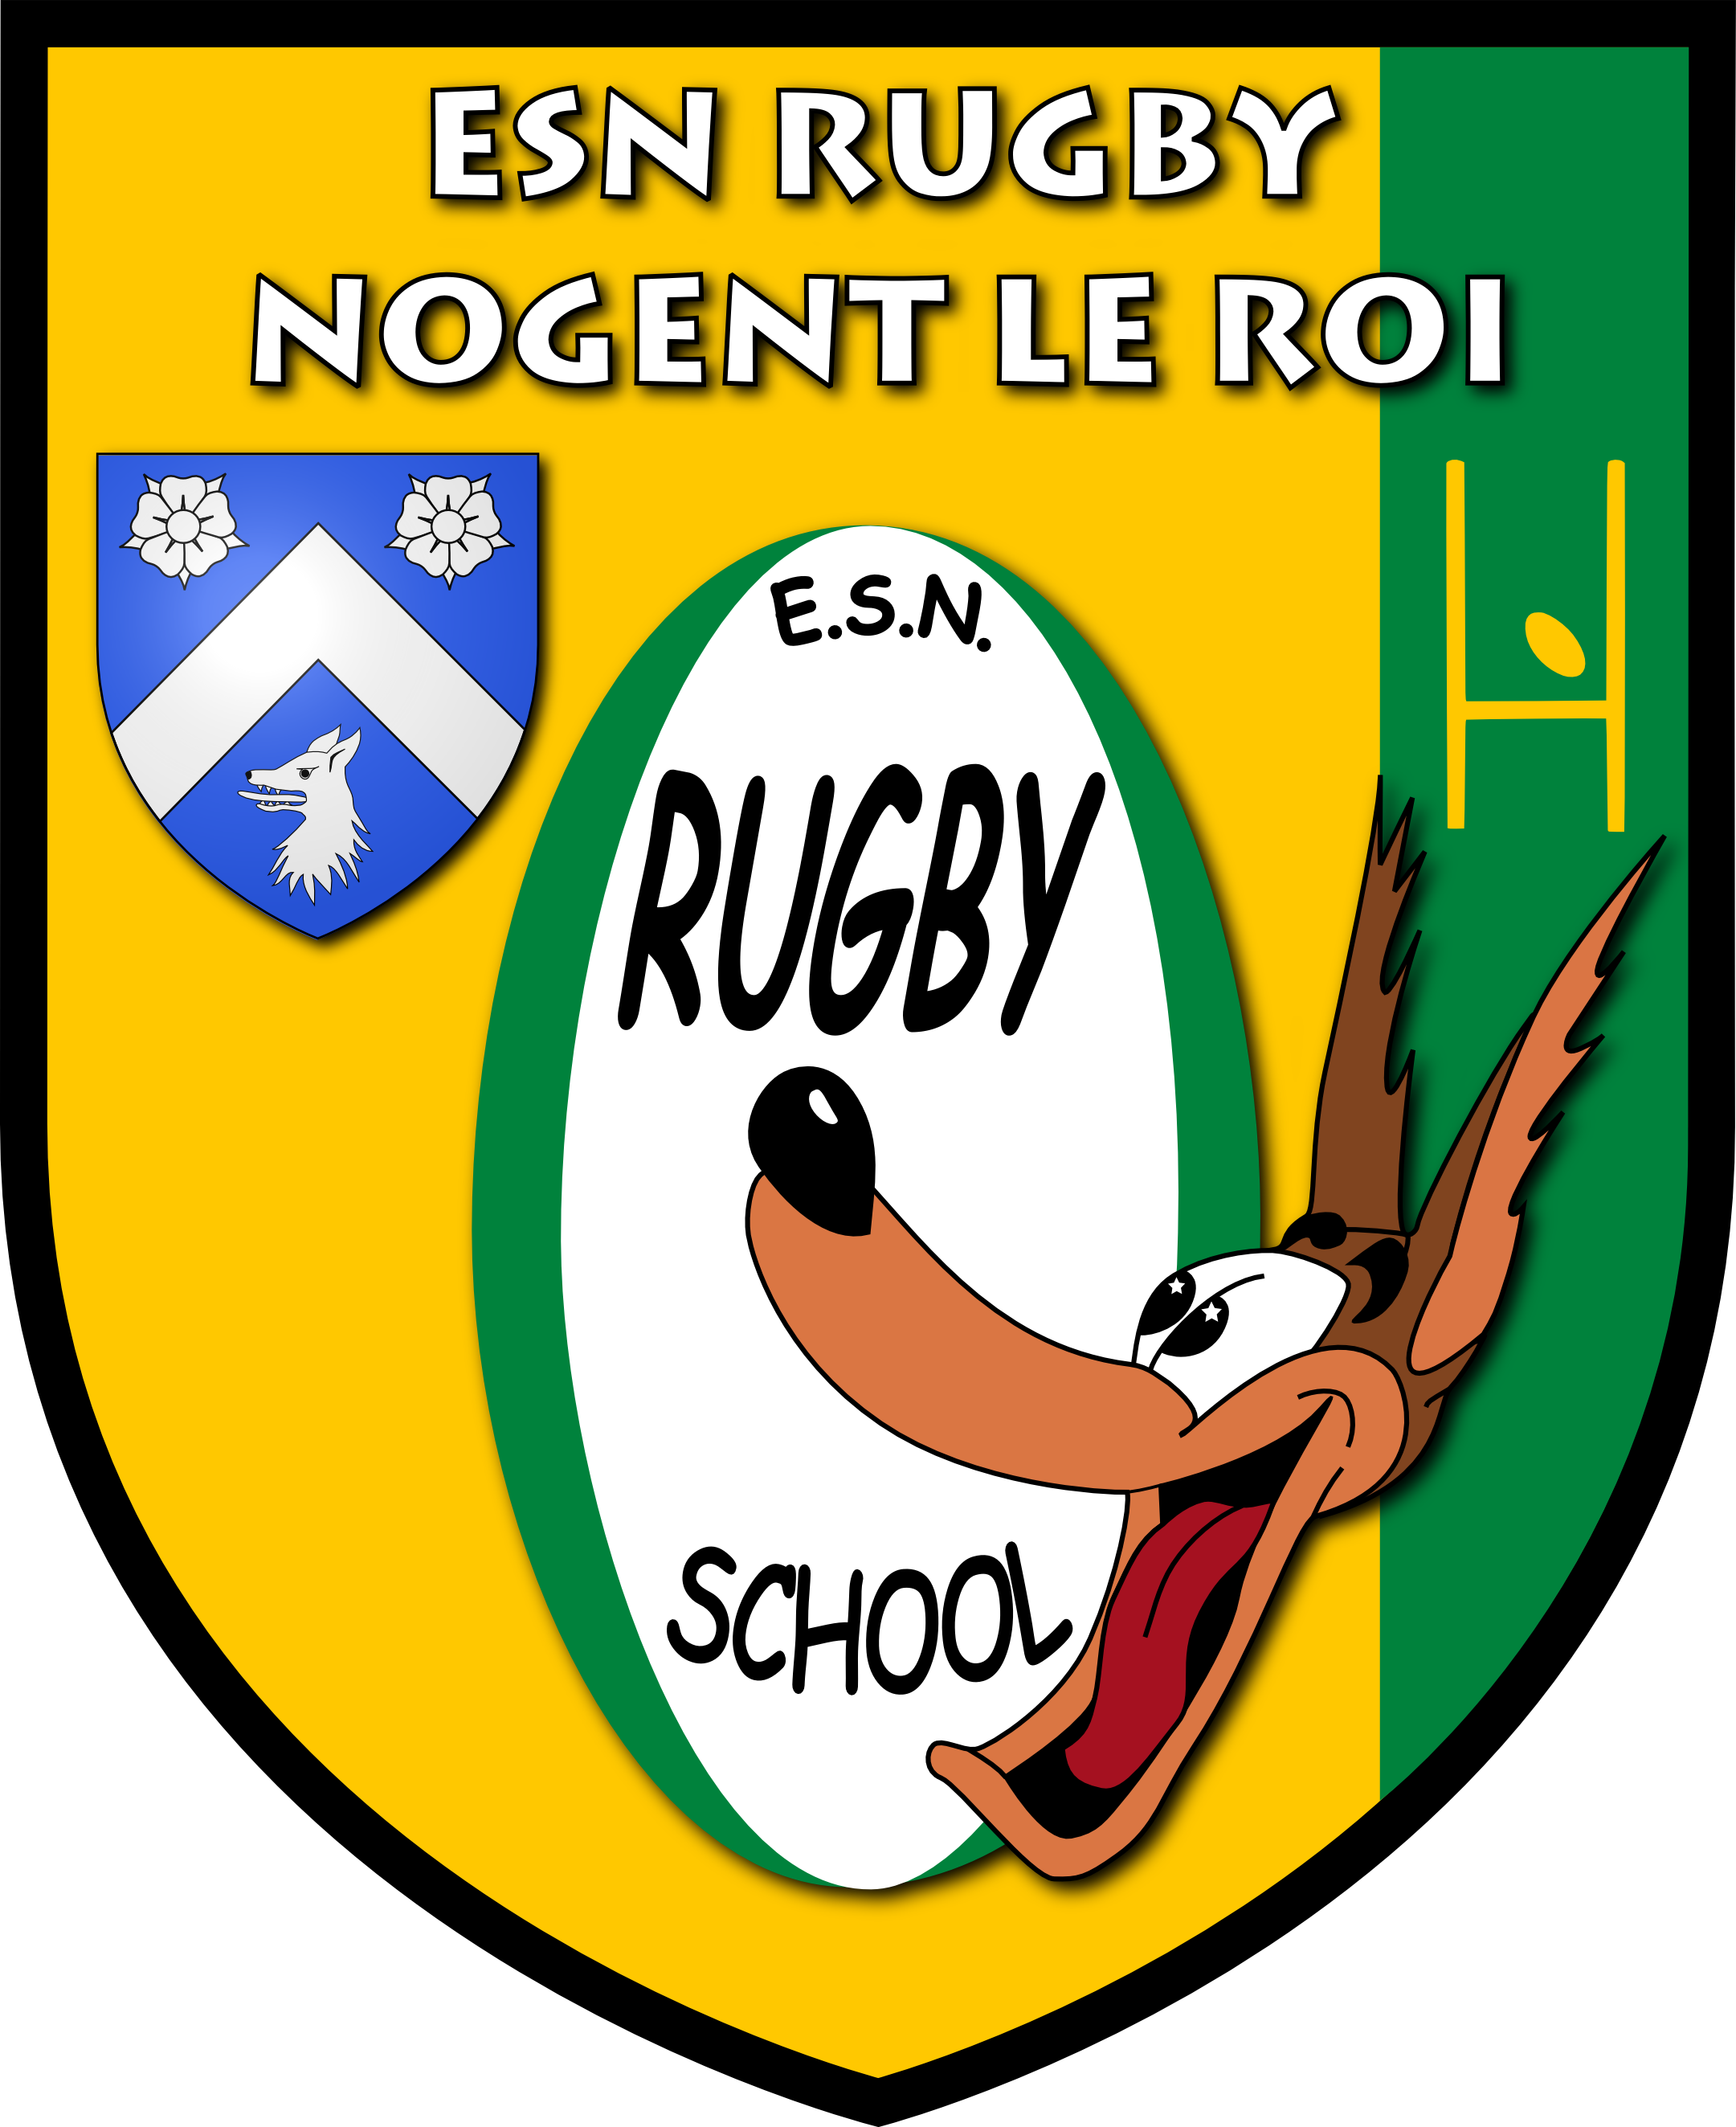 ESN RUGBY